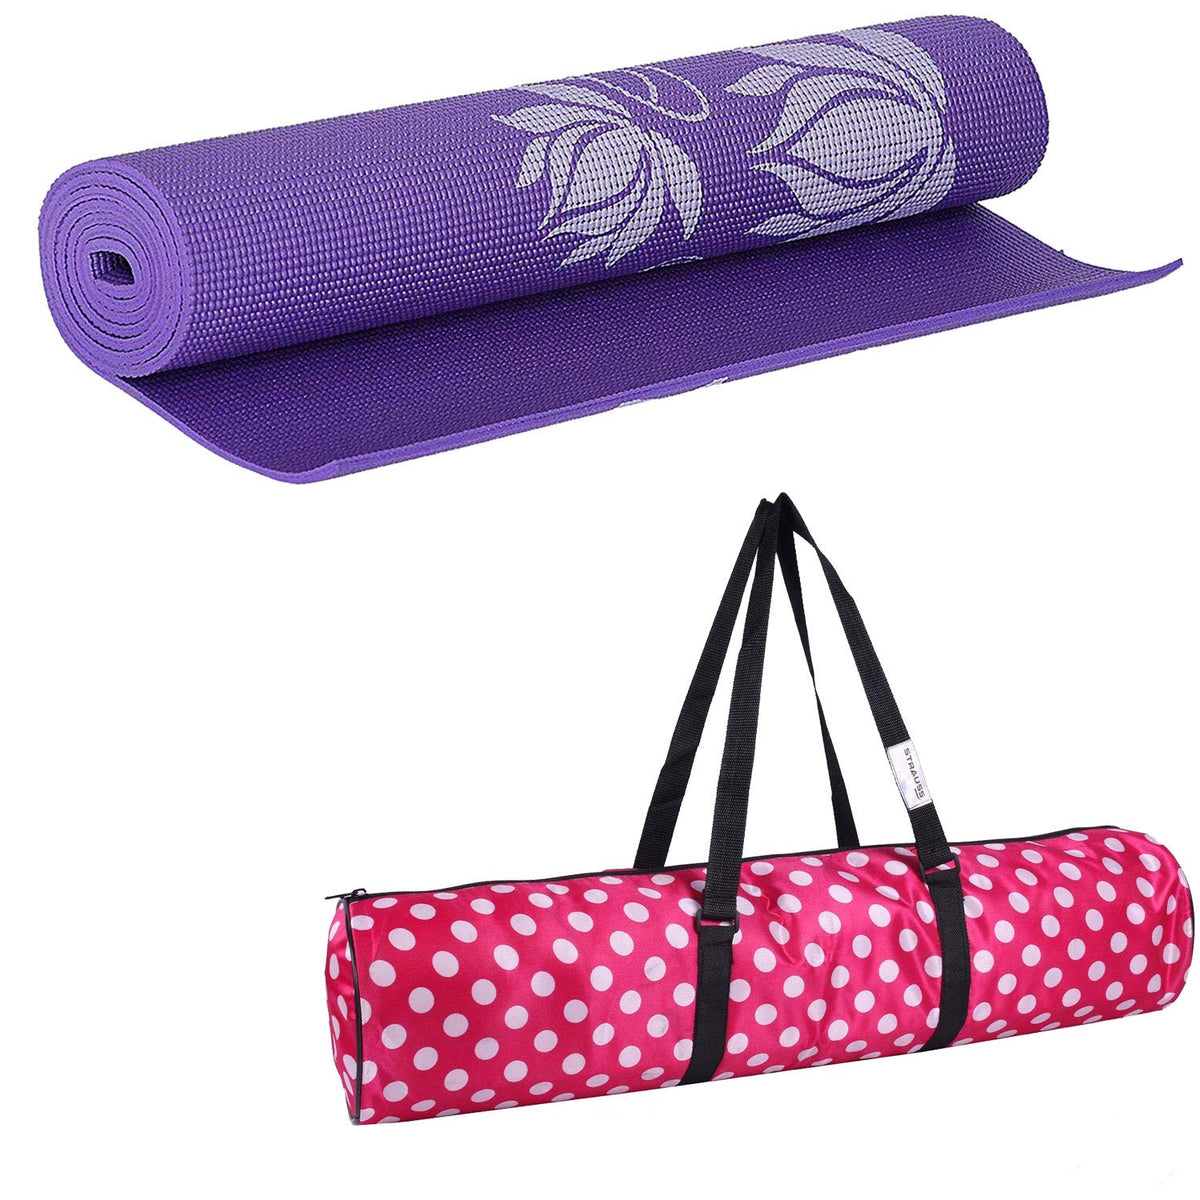 Strauss Yoga Mat 6MM (Floral Orange) and Yoga Shoes, (Black)